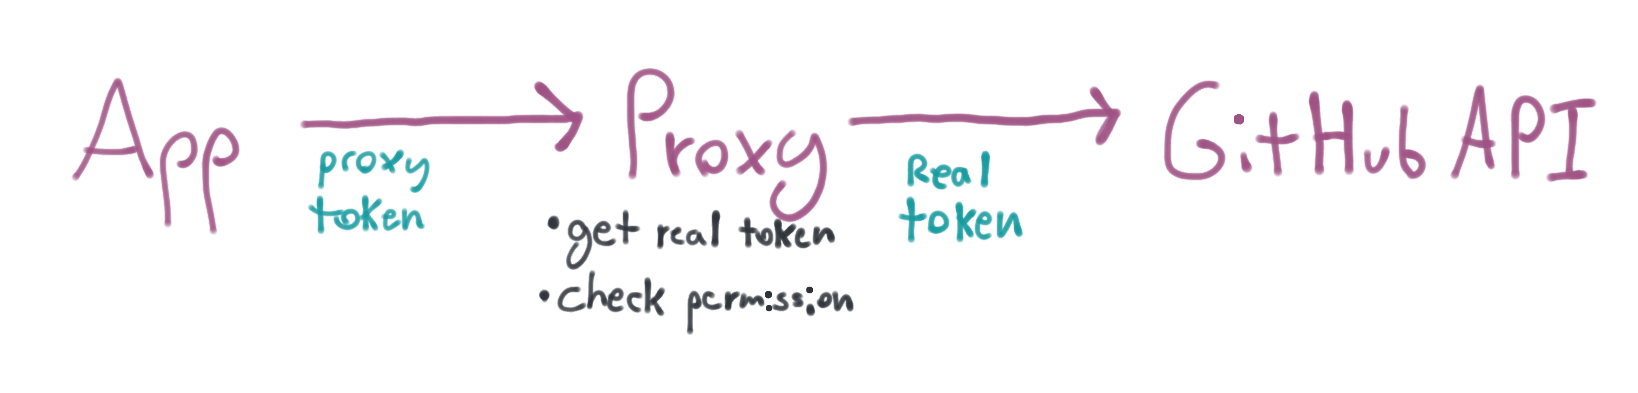 Illustration the proxy taking a proxy token and then giving a real token to the GitHub API